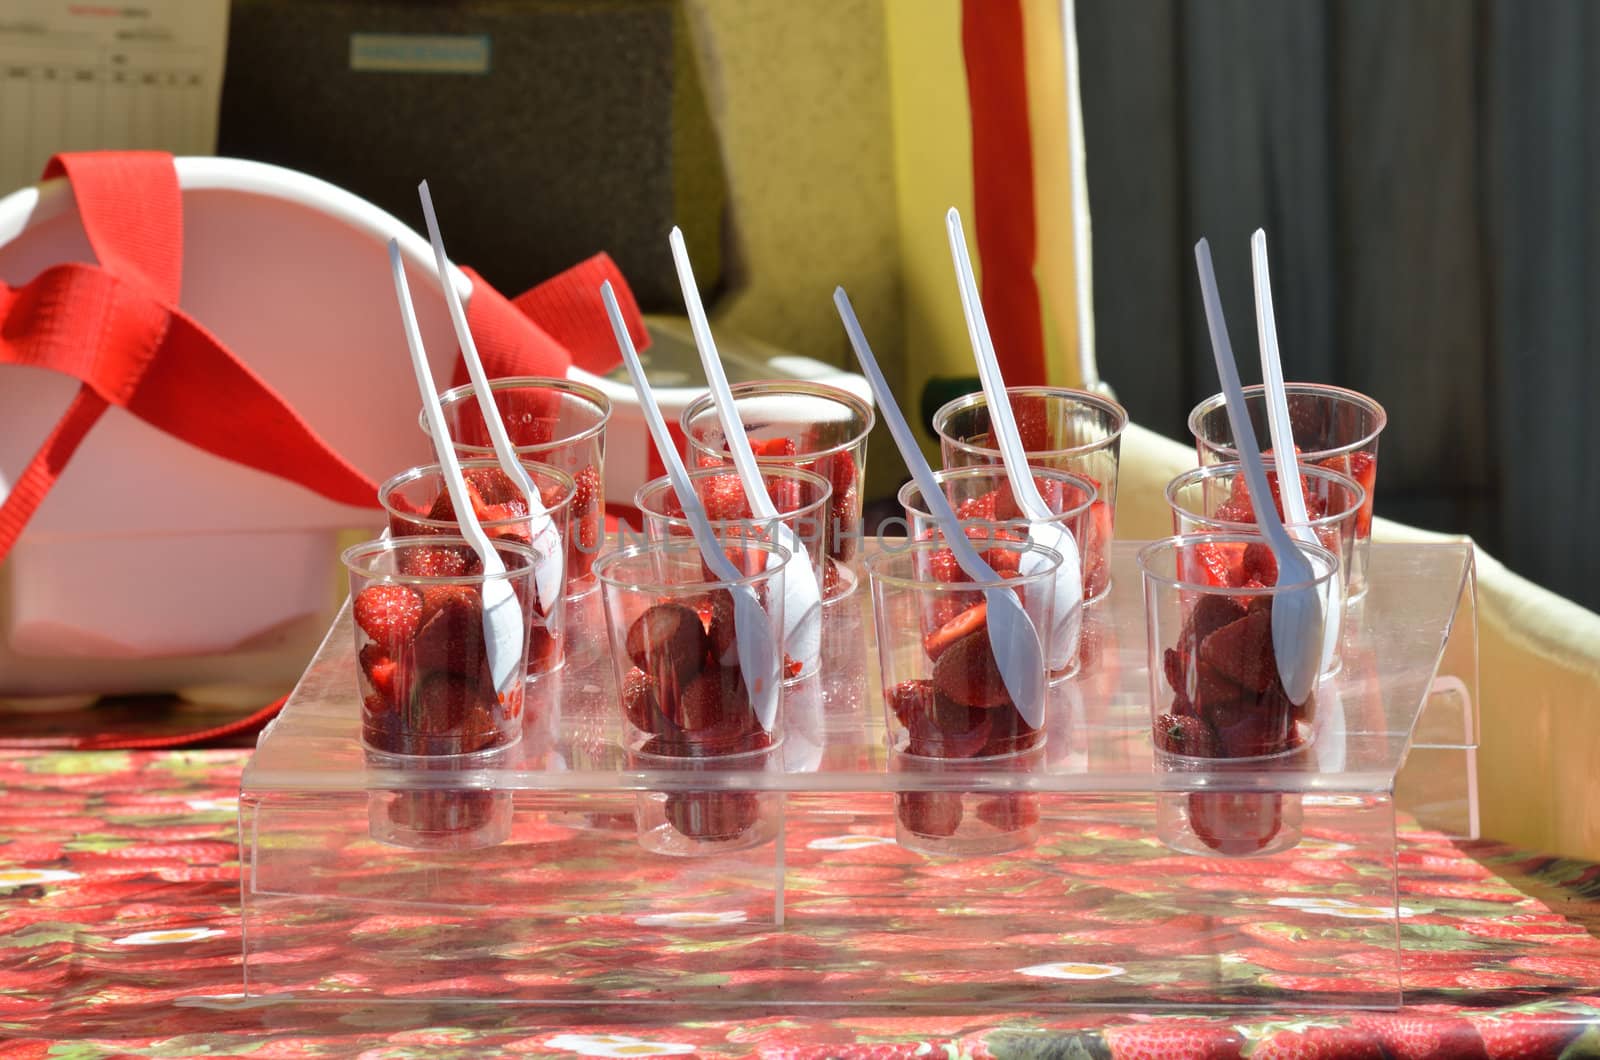 Strawberries in plastic cups with spoons